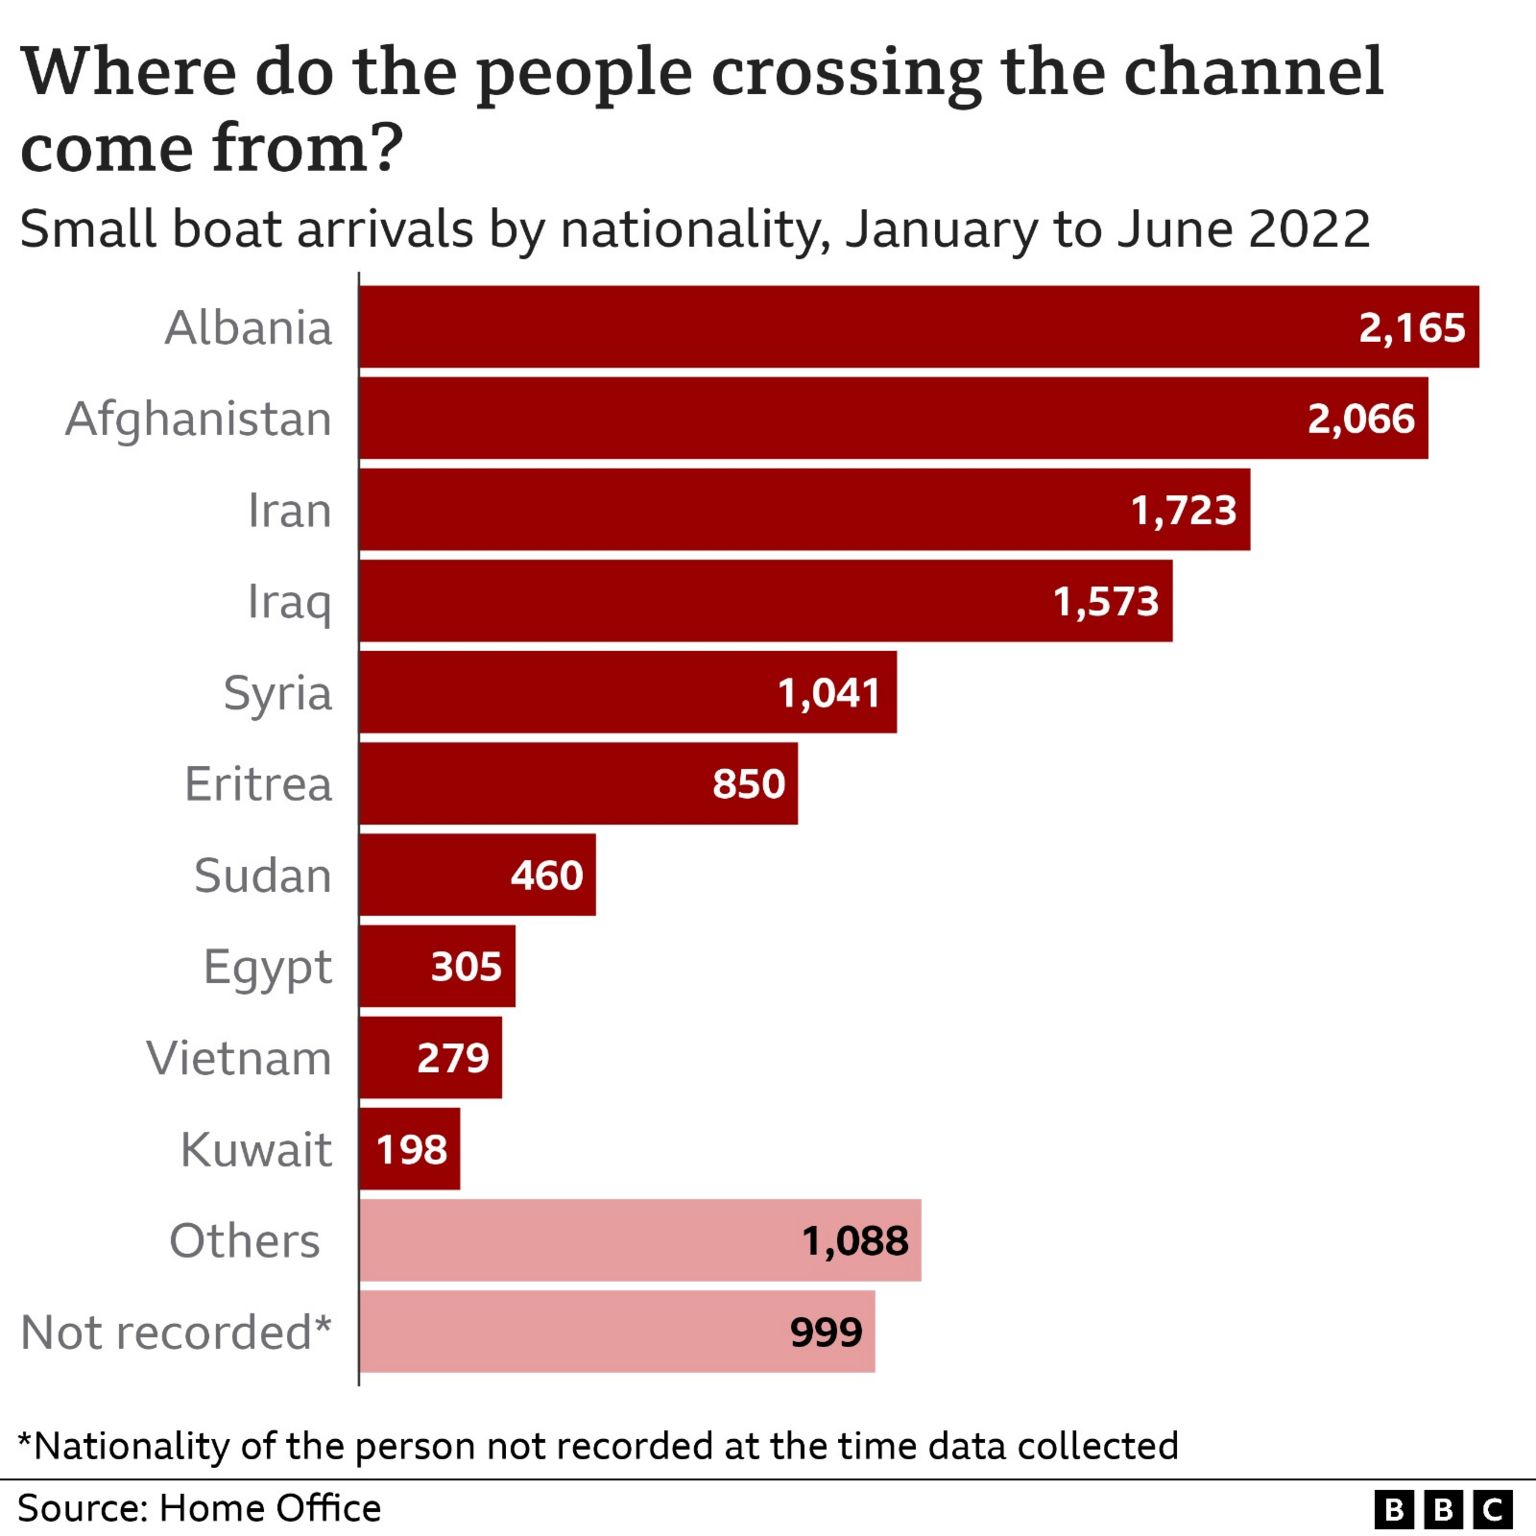 Graphic showing the nationalities of people arriving into the UK by small boat: Albania 2,165; Afghanistan 2,066; Iran 1,723; Iraq 1,573; Syria 1,041; Eritrea 850; Sudan 460; Egypt 305; Vietnam 279; Kuwait 198